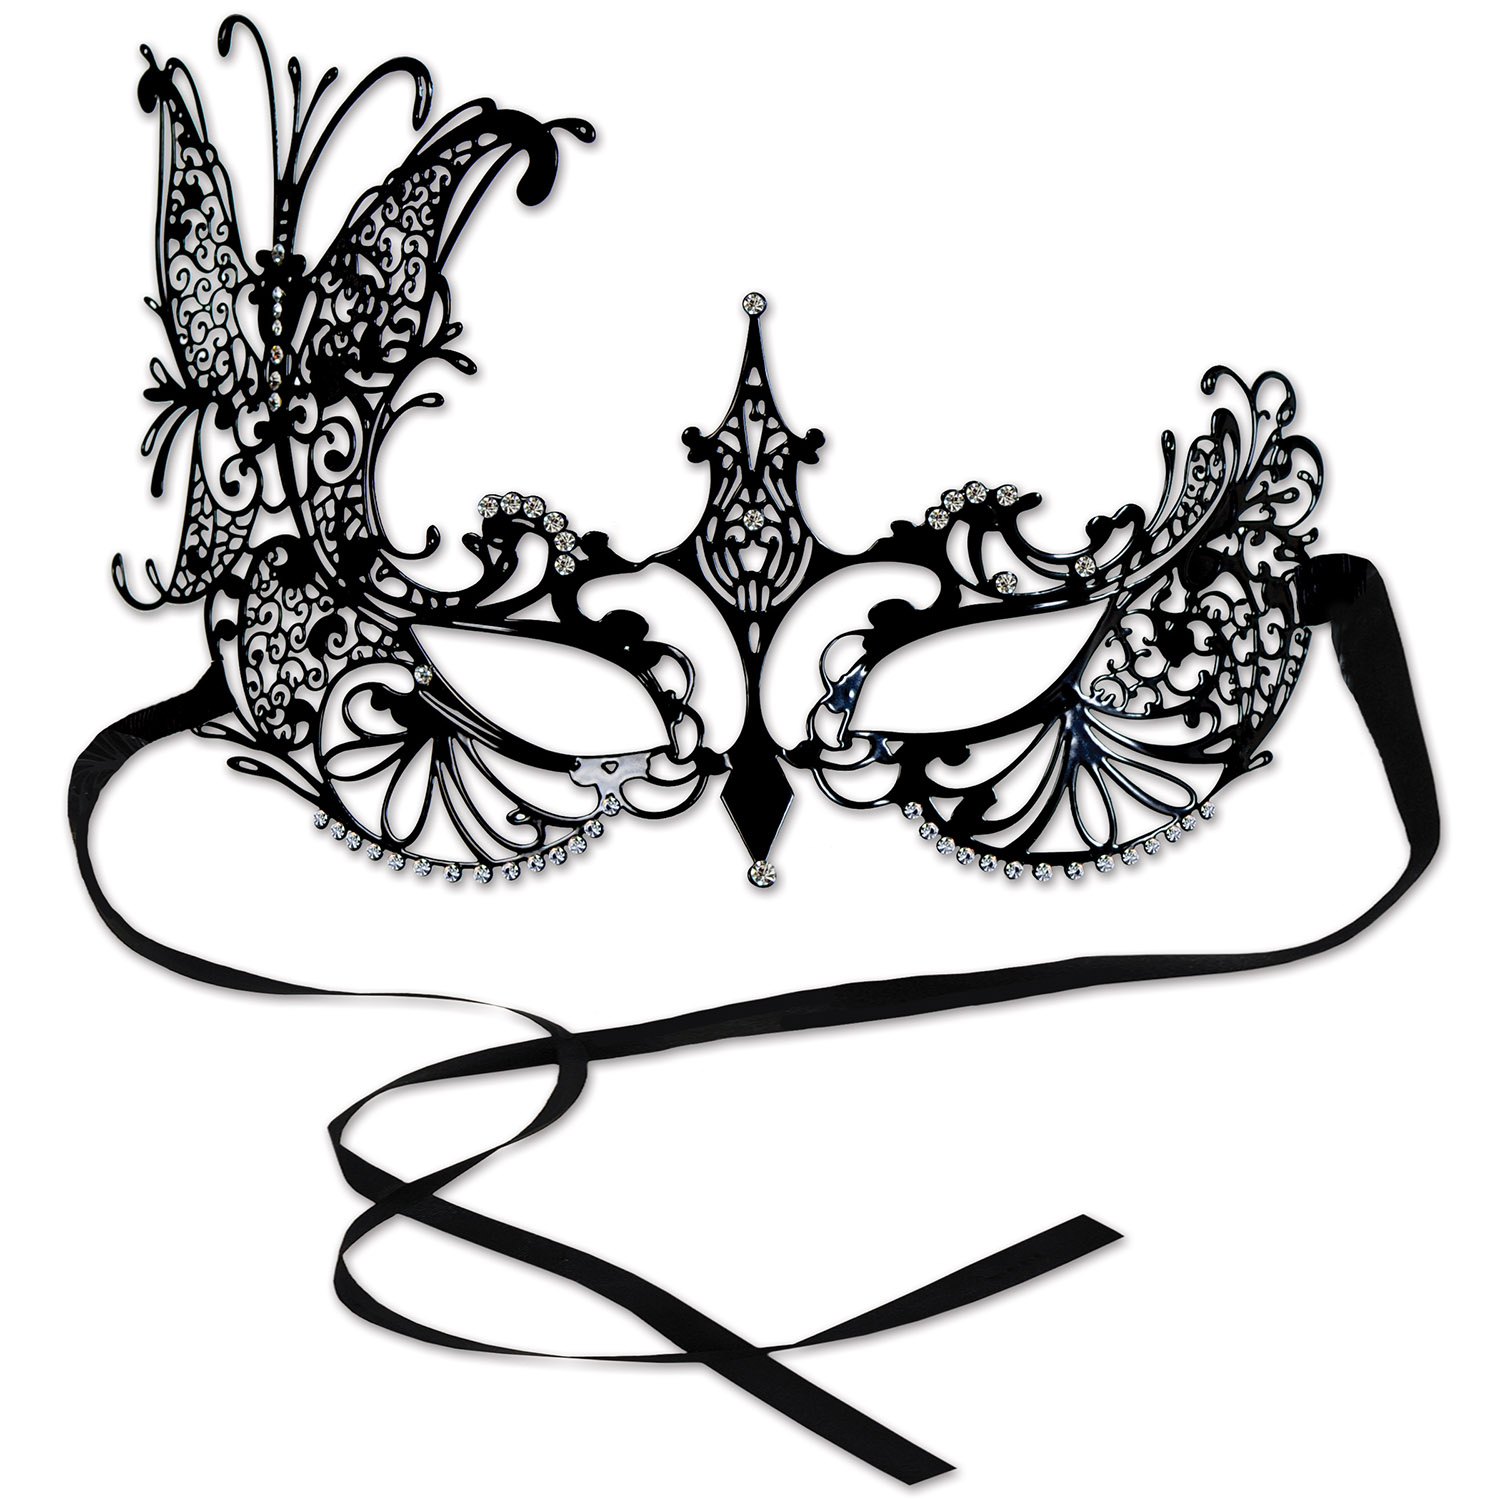 Picture of Beistle Company 54229 Metal Filigree Masquerade Mask - Pack of 6